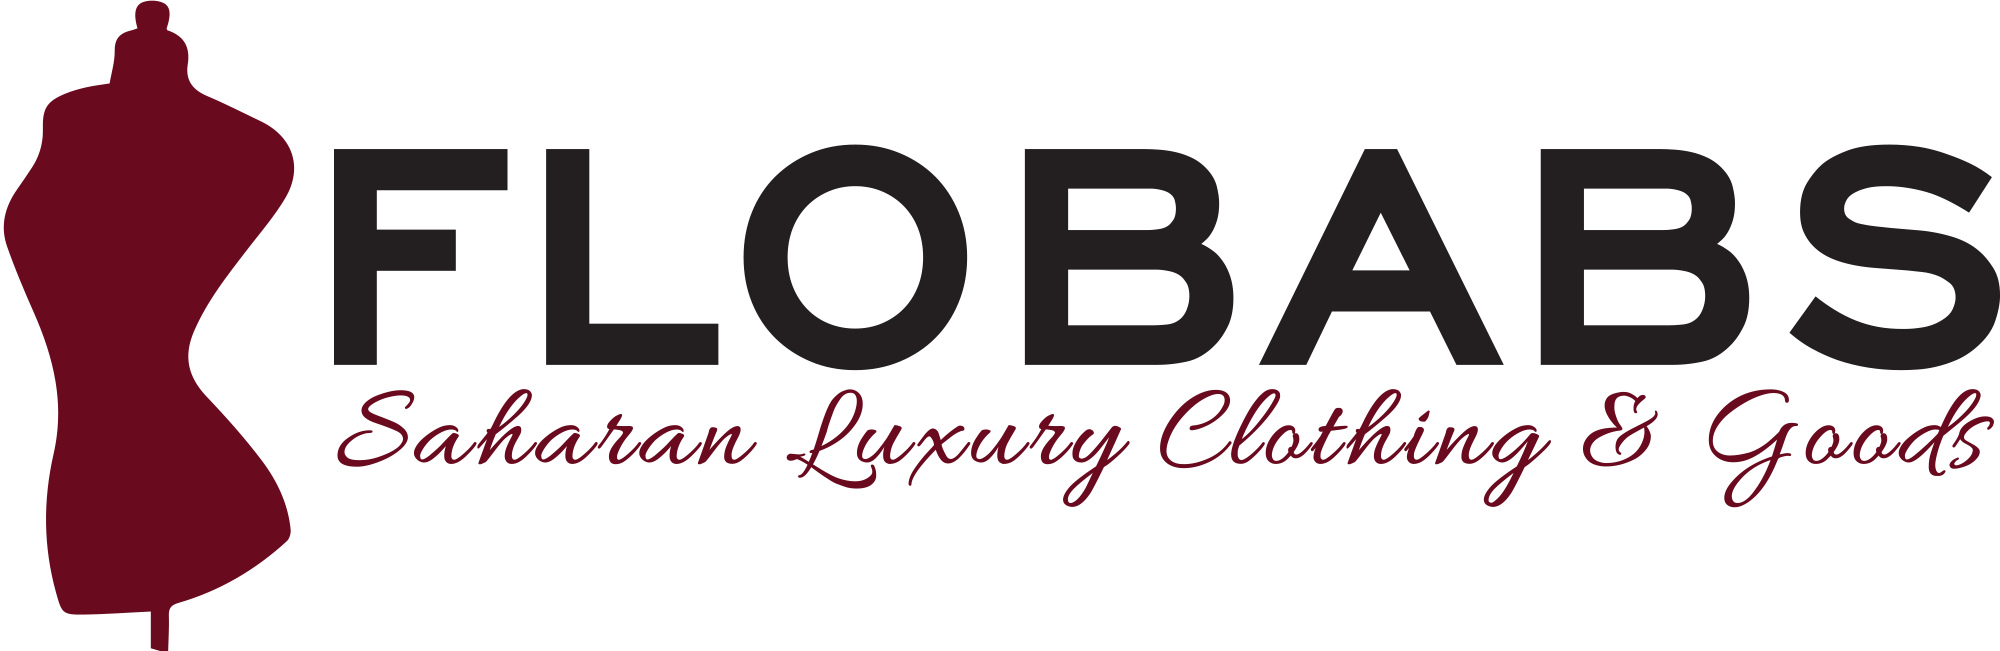 Flobabs Saharan Luxury Clothing and Goods